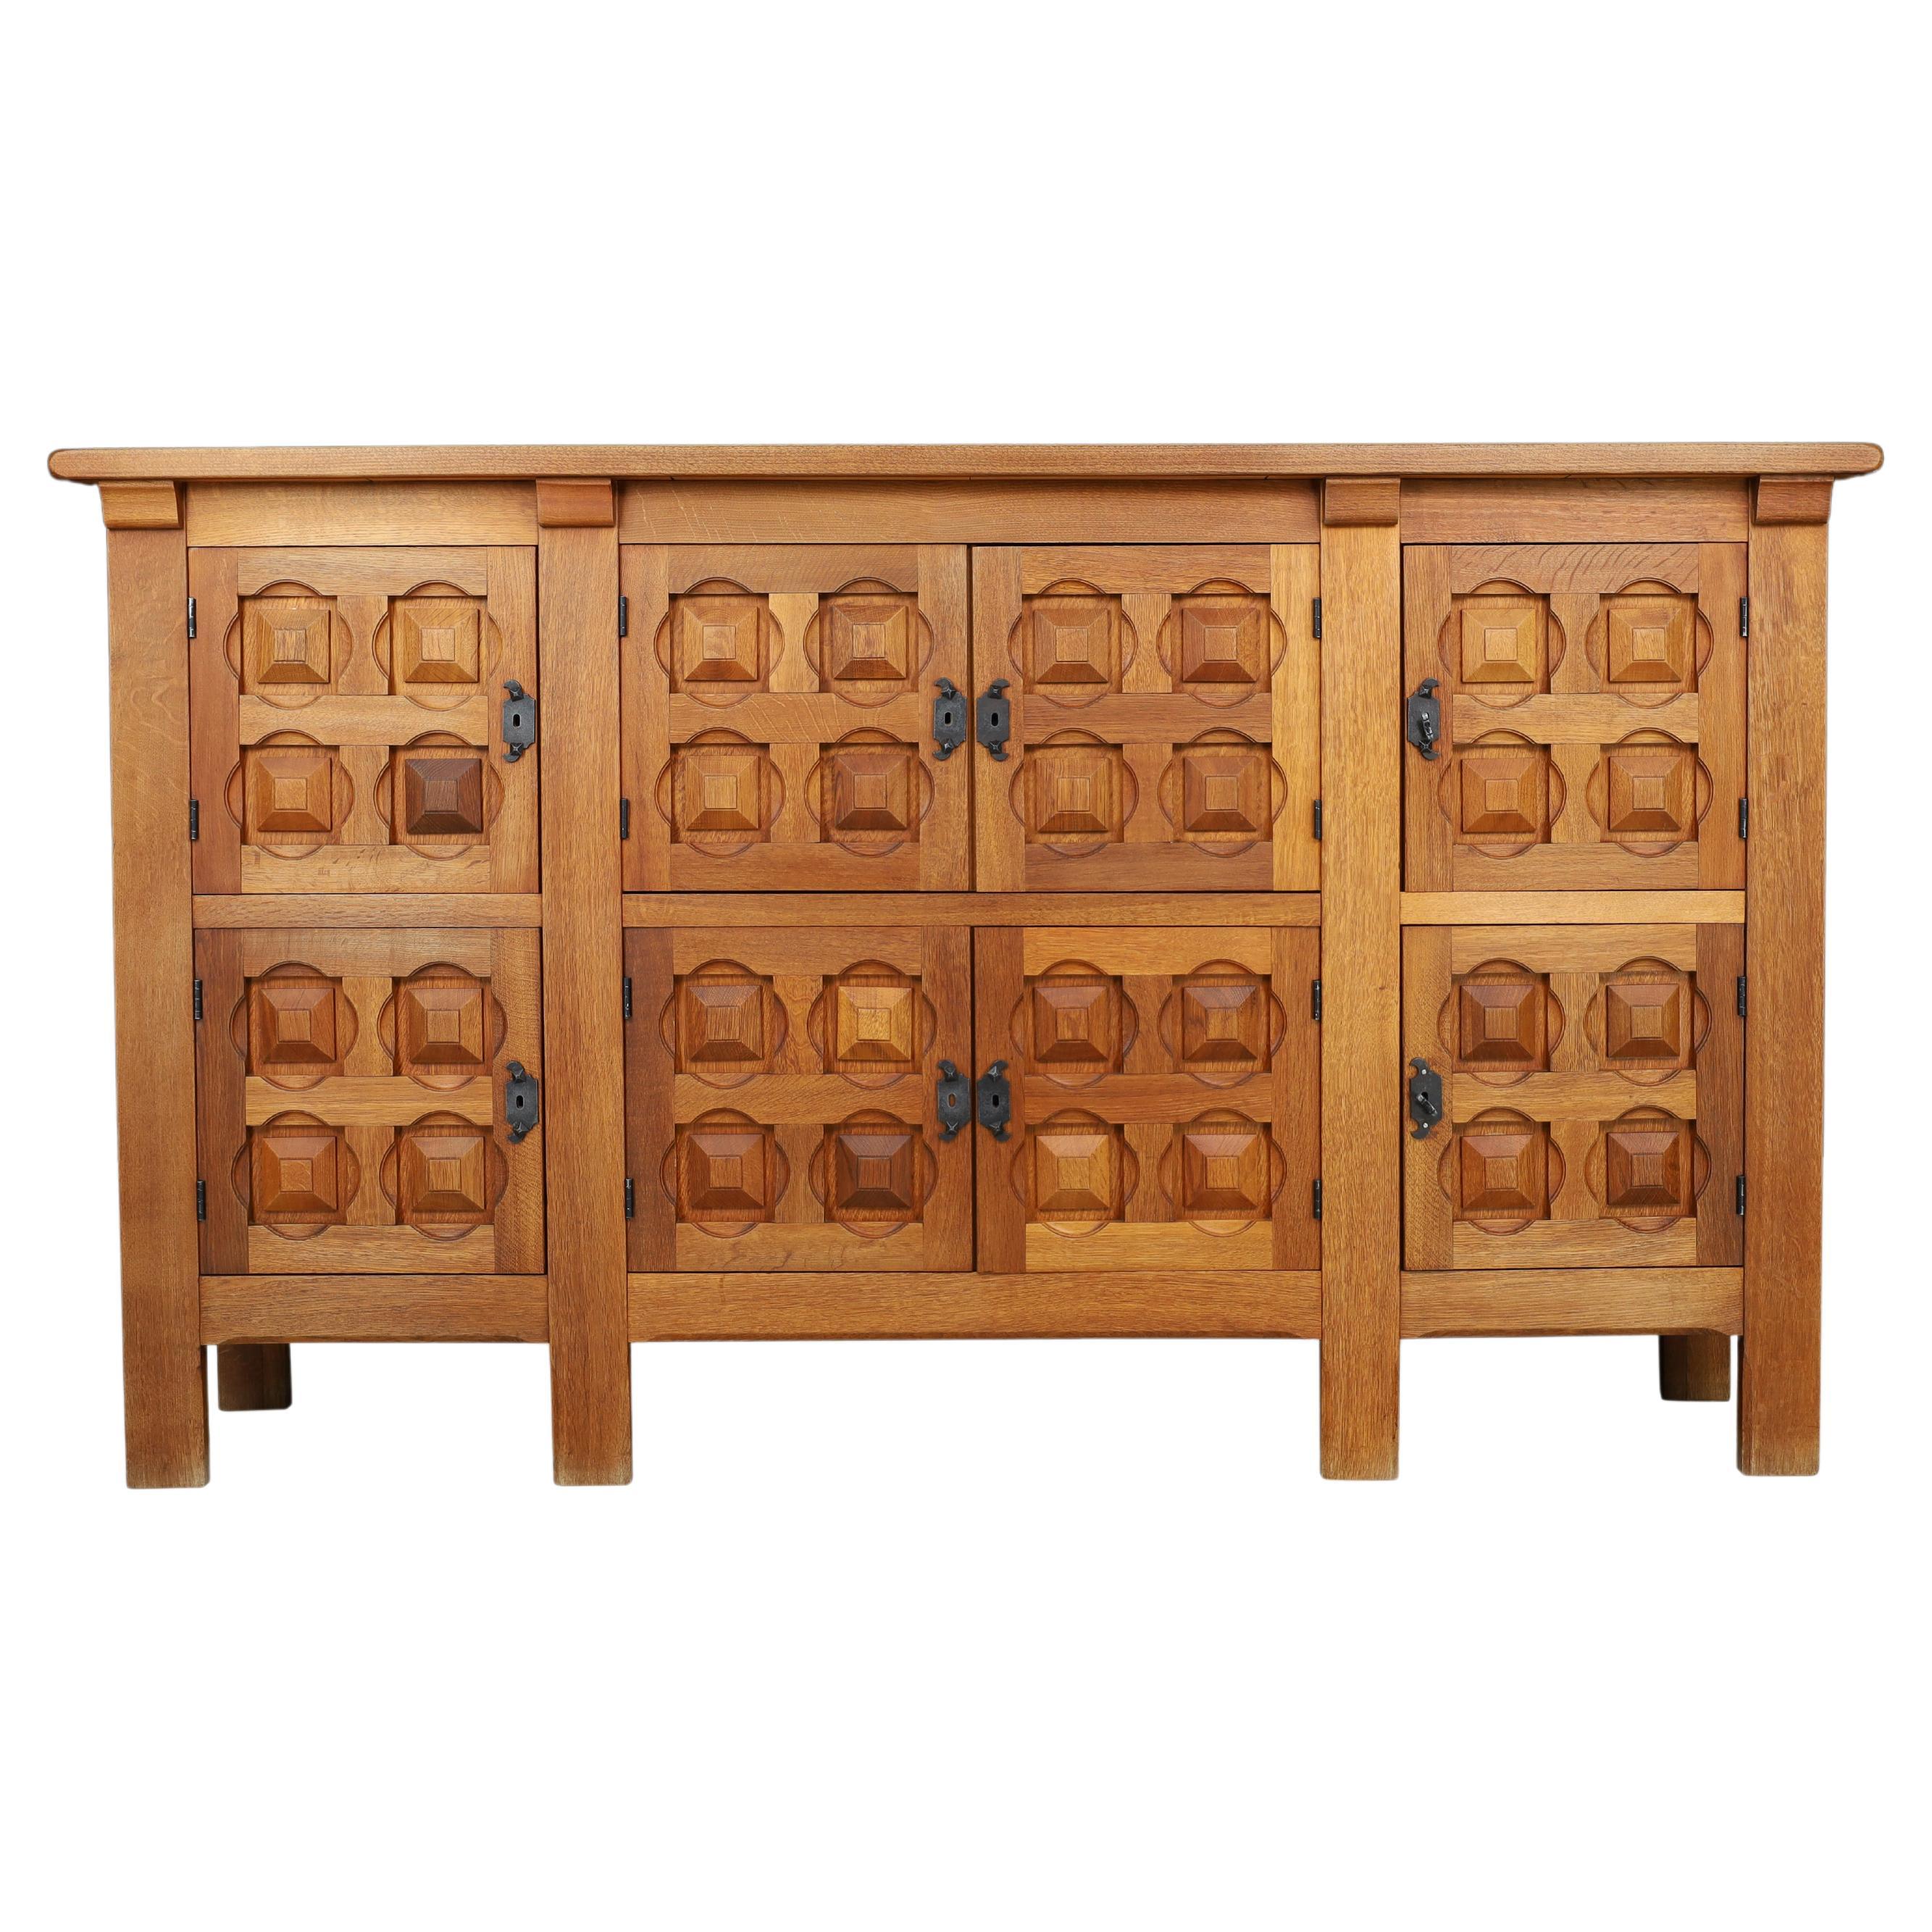 Handcrafted Solid Oak Credenza with Wrought Iron Details Spain 1940s For Sale